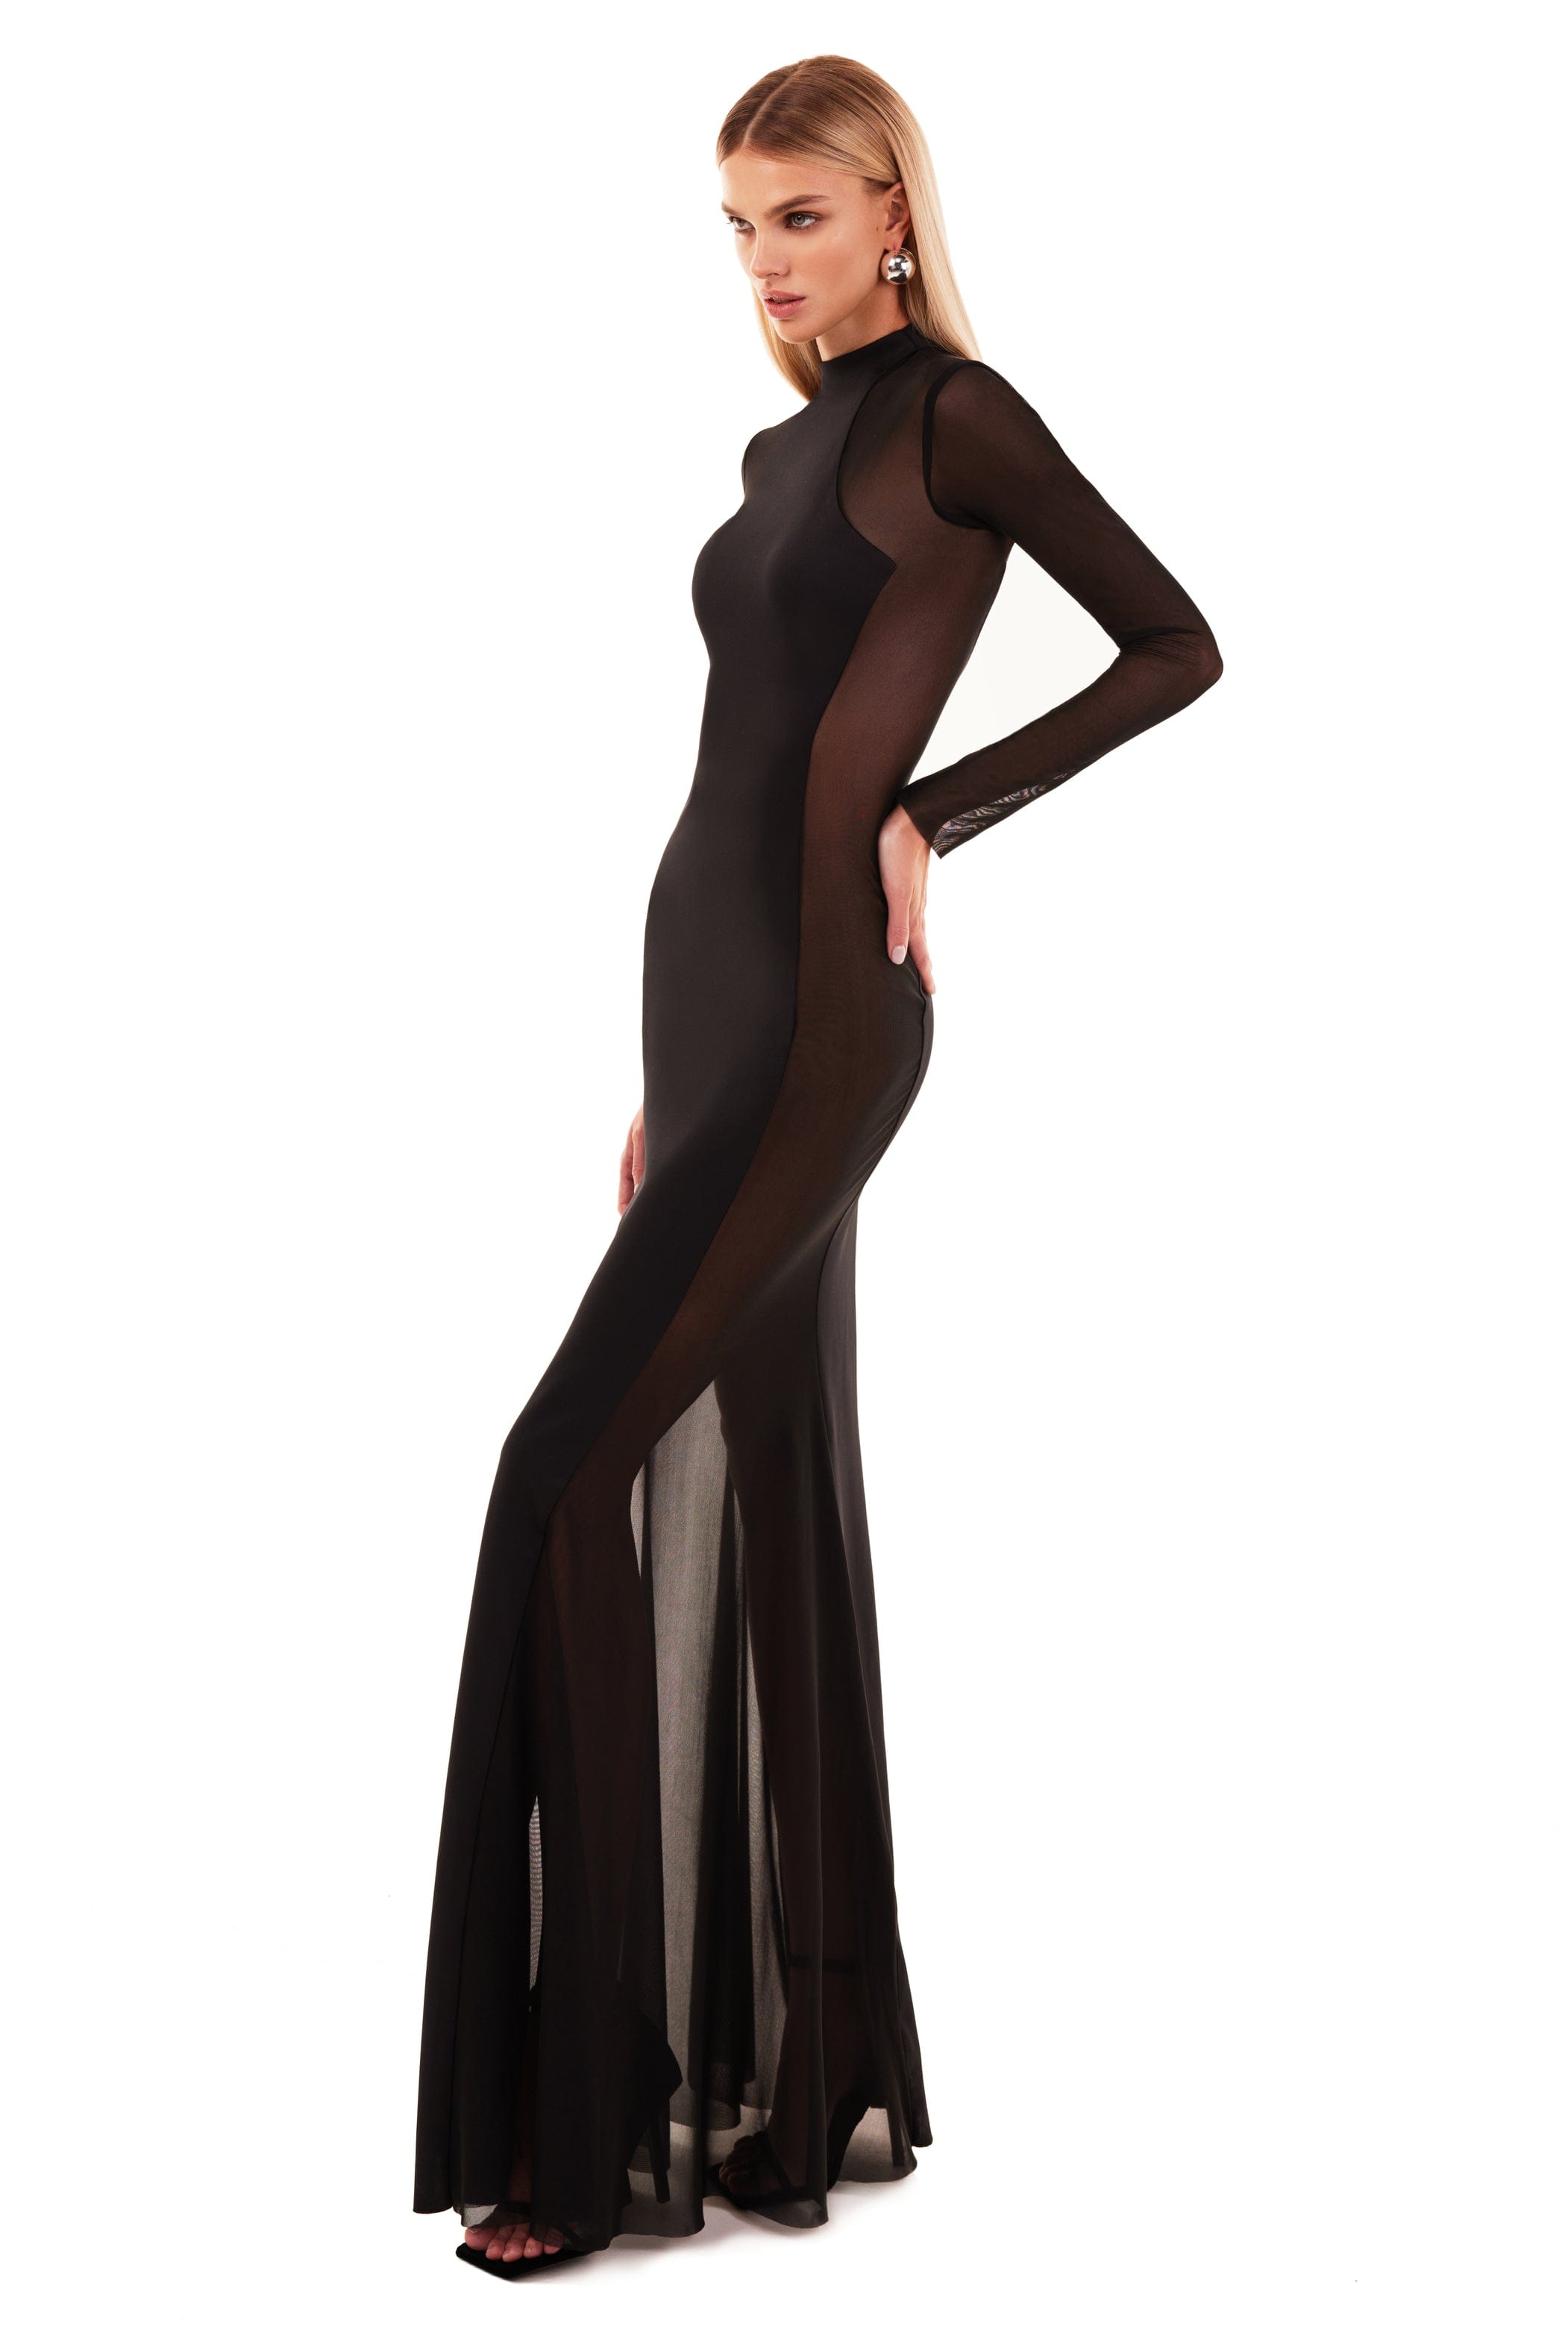 Showstopper black dress with semi-transparent inserts